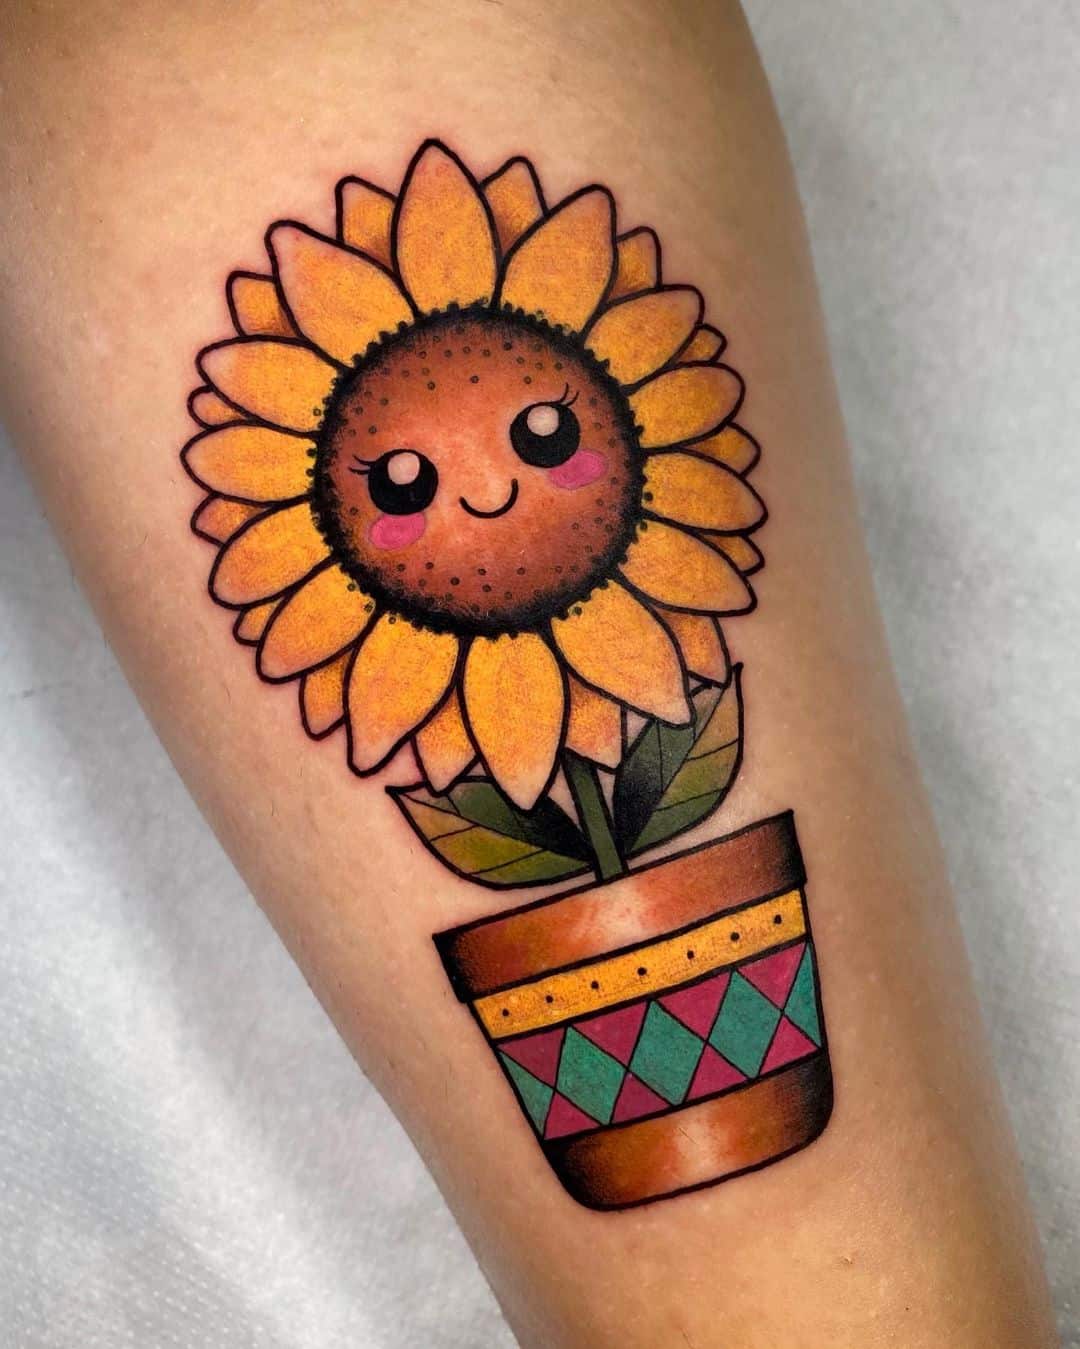 40 Fantastic Sunflower Tattoos That Will Inspire You To Get Inked   TattooBlend  Sunflower tattoo meaning Sunflower tattoos Sunflower tattoo  shoulder